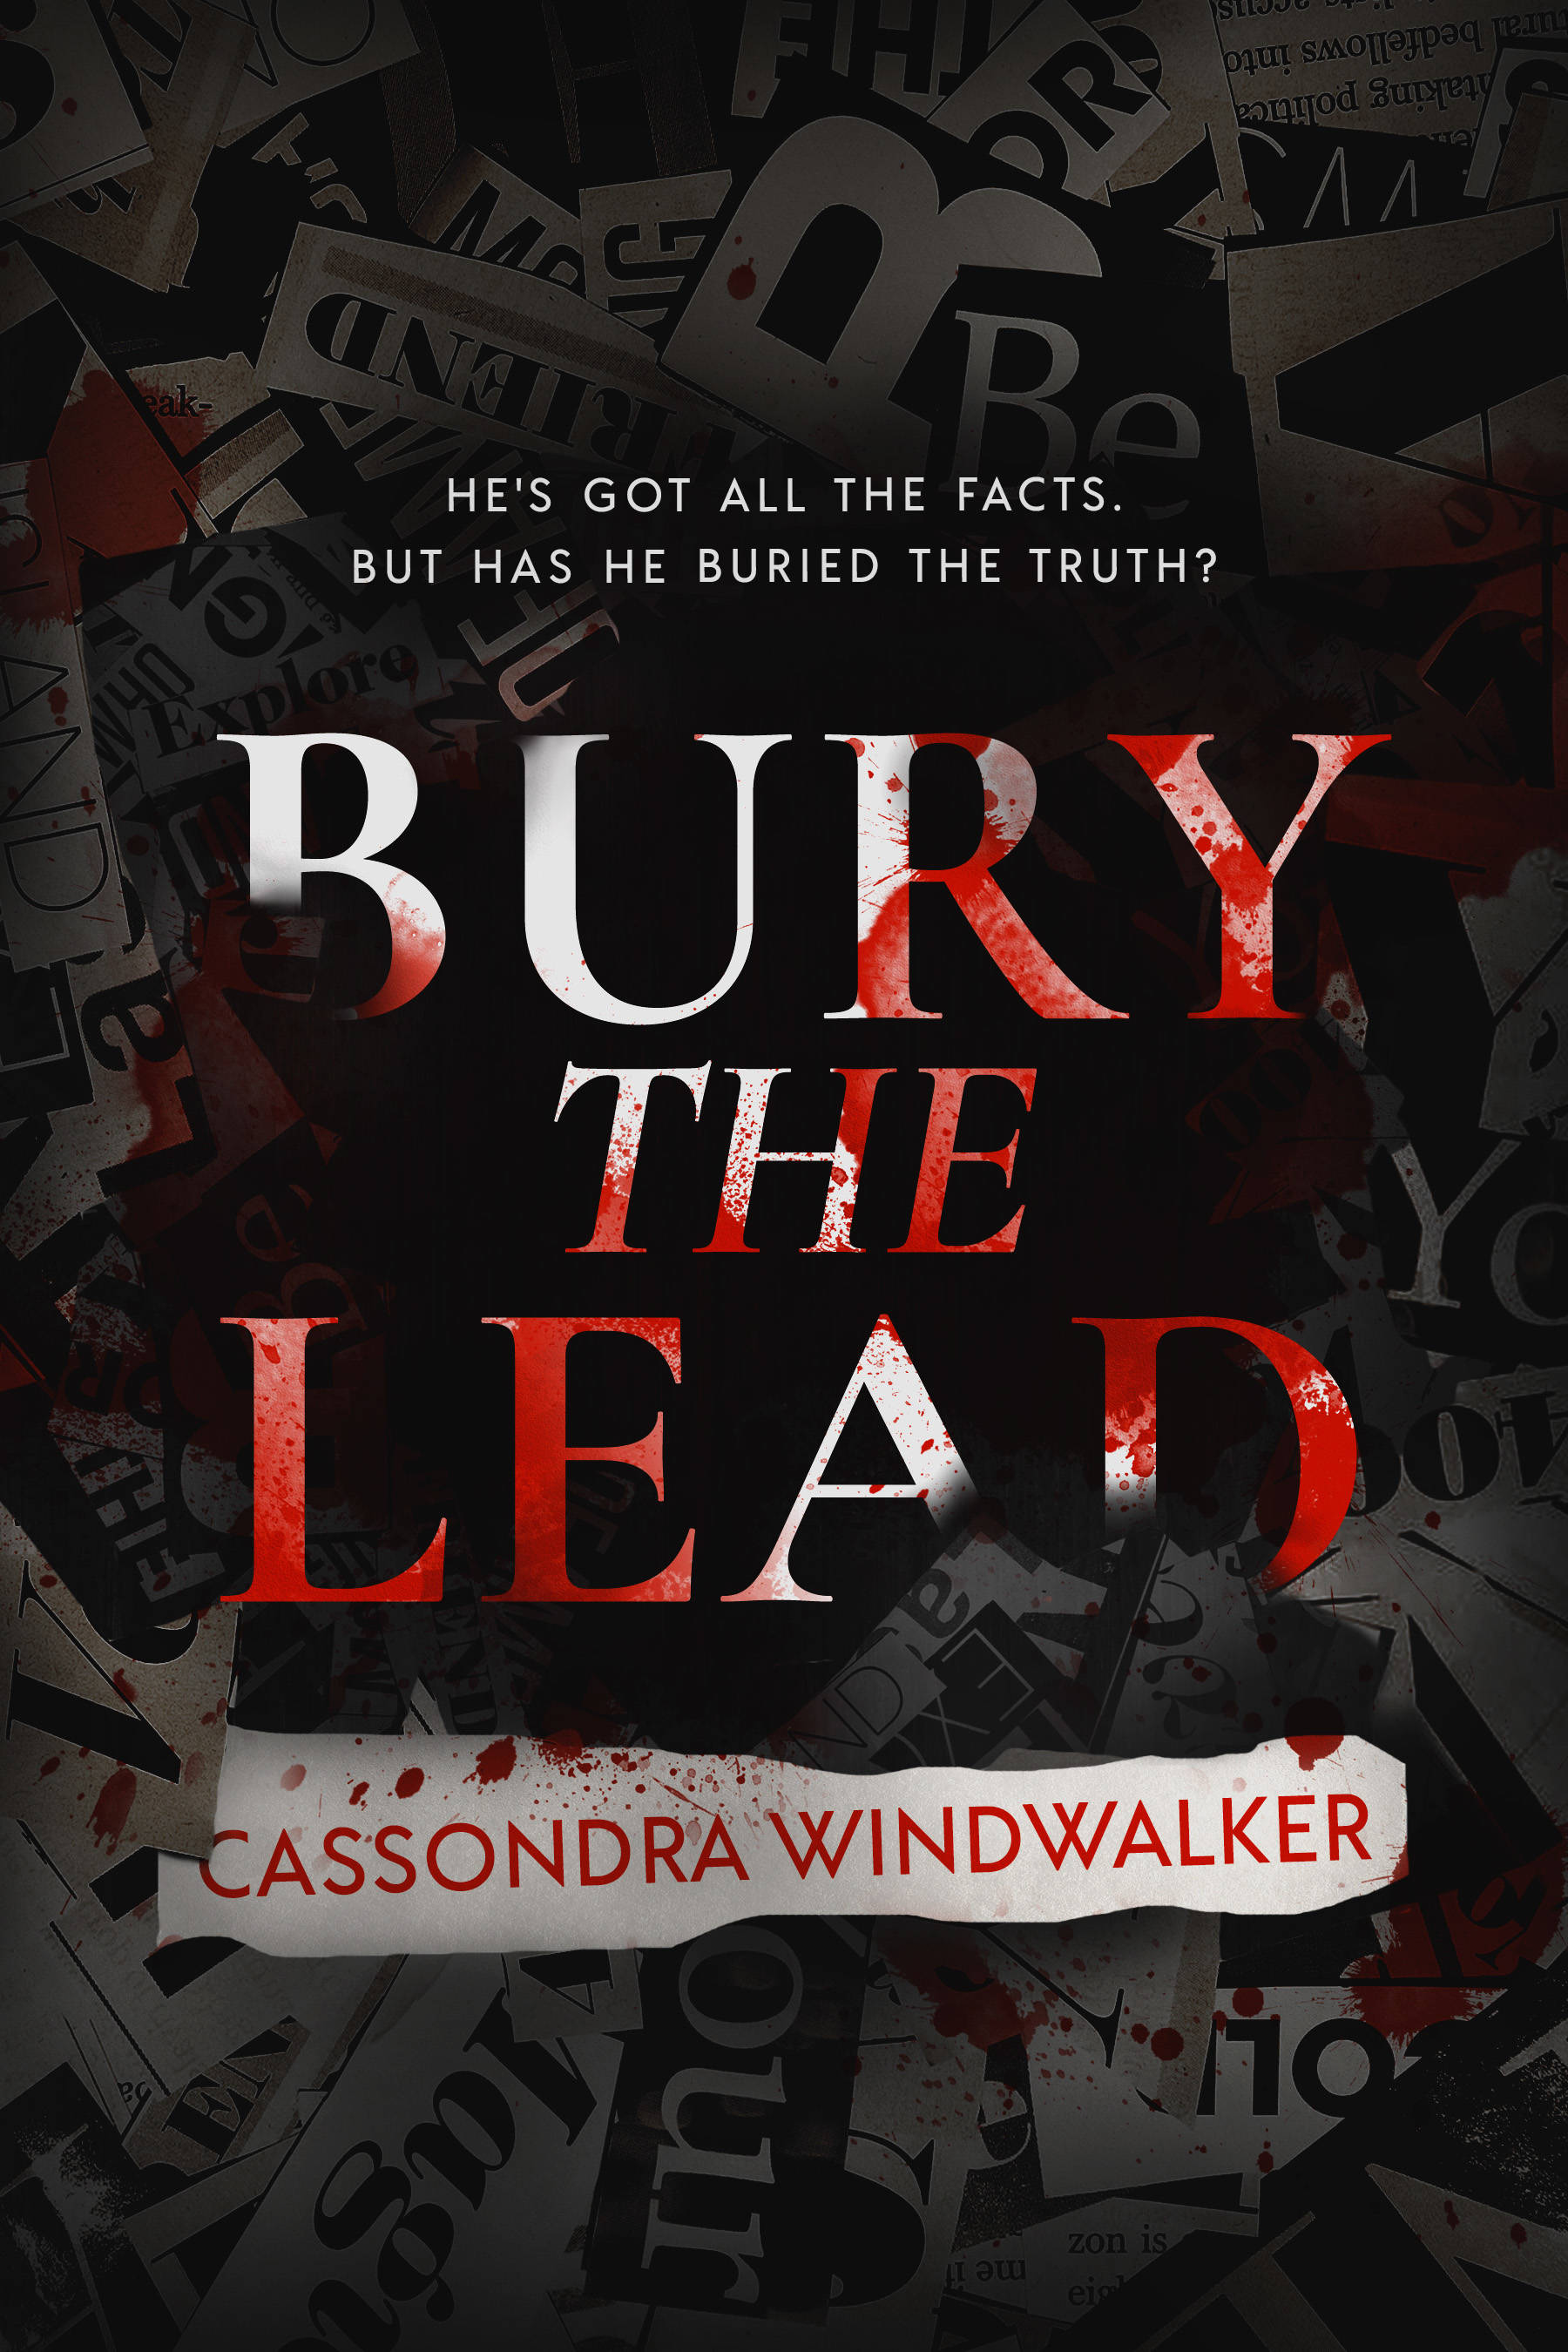 Cover art for “Bury the Lead,” Anchor Point author Cassondra Windwalker’s new novel. (Image submitted)